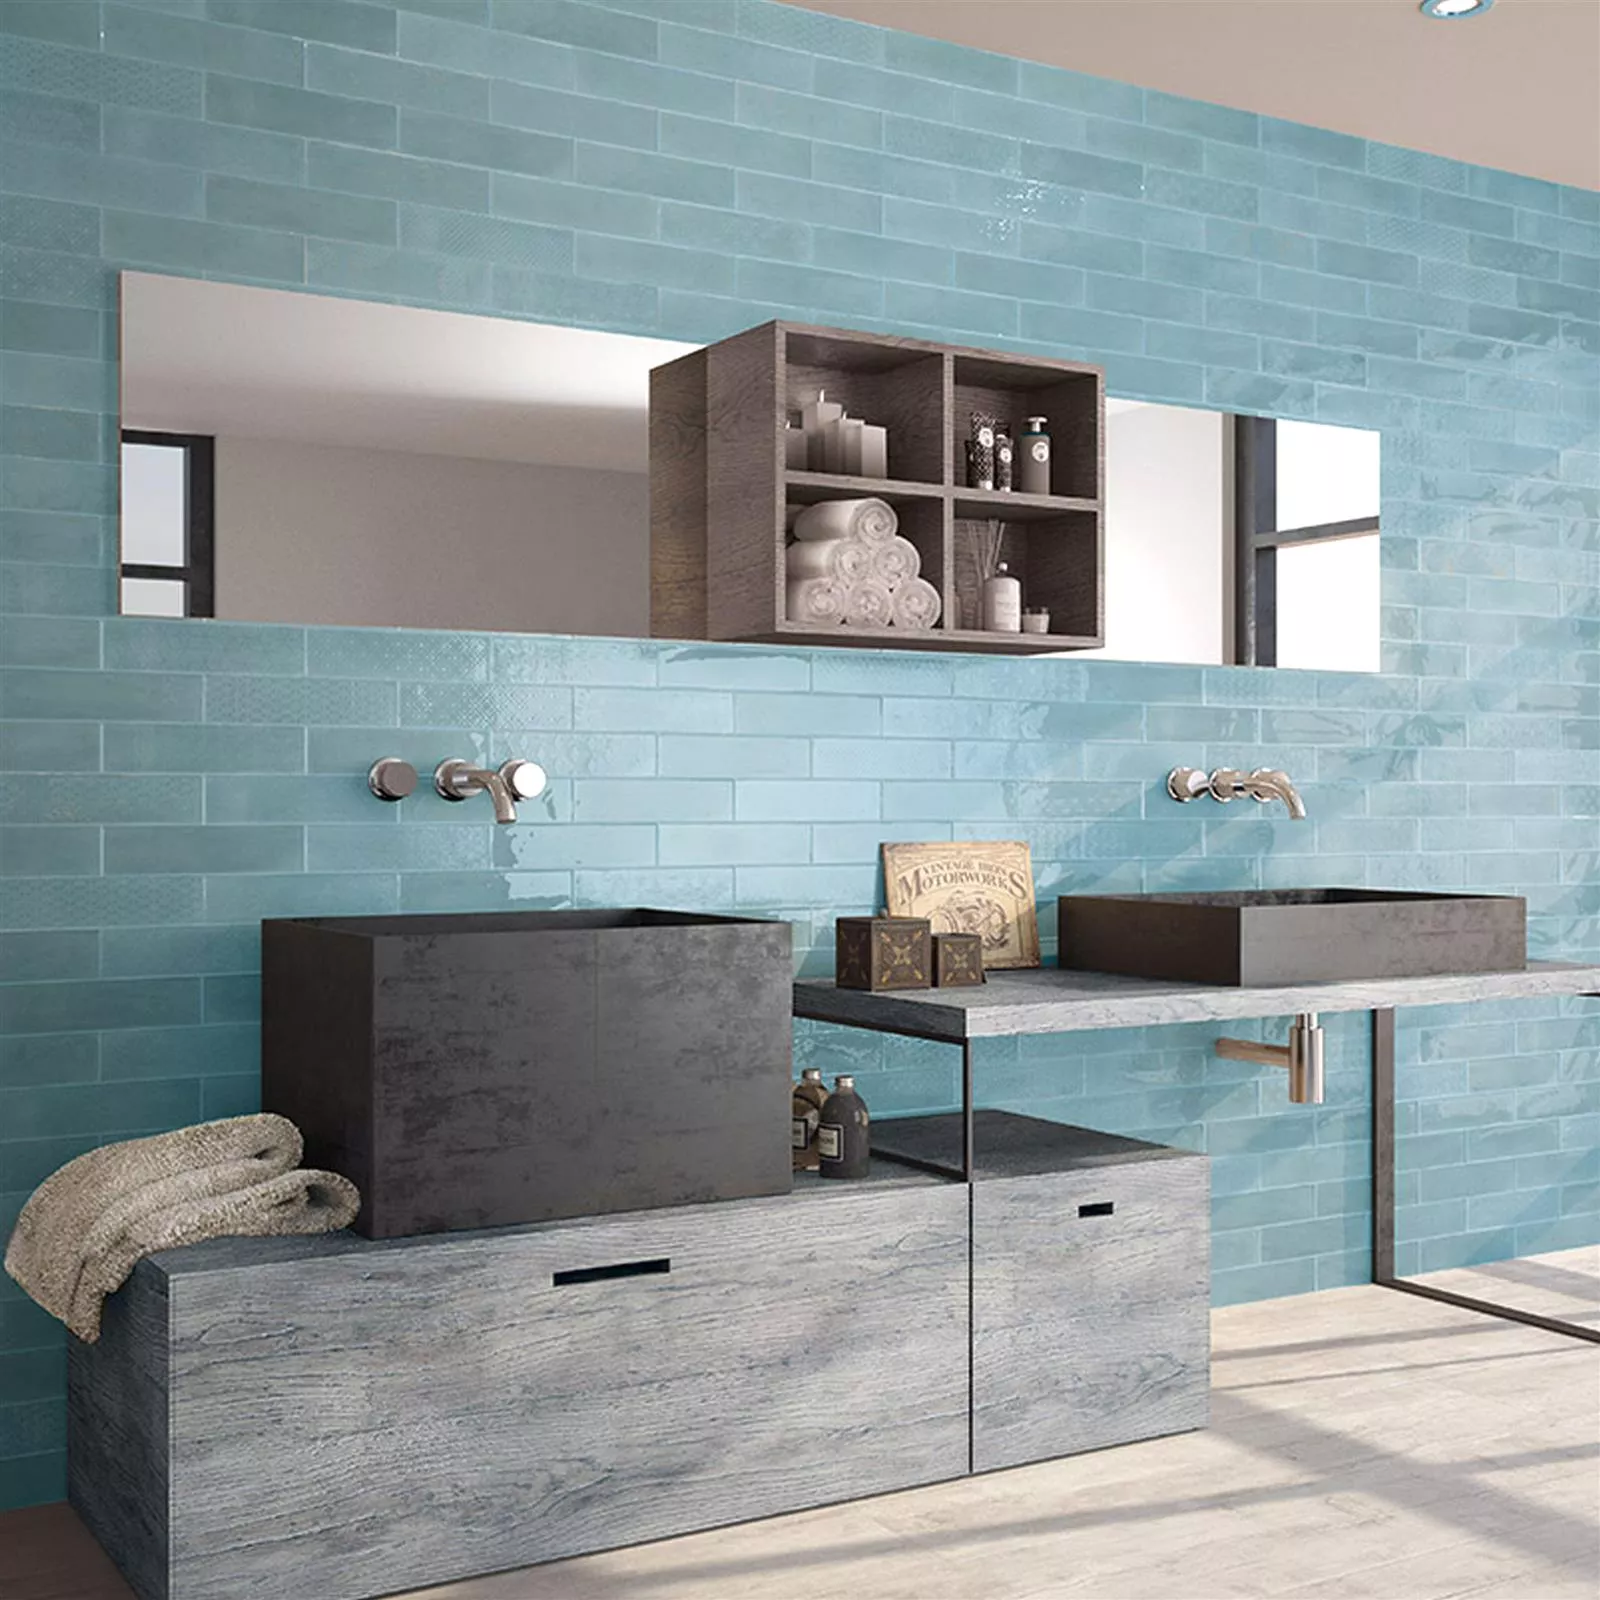 Sample Wall Tiles Conway Waved 7,5x30cm Light Blue